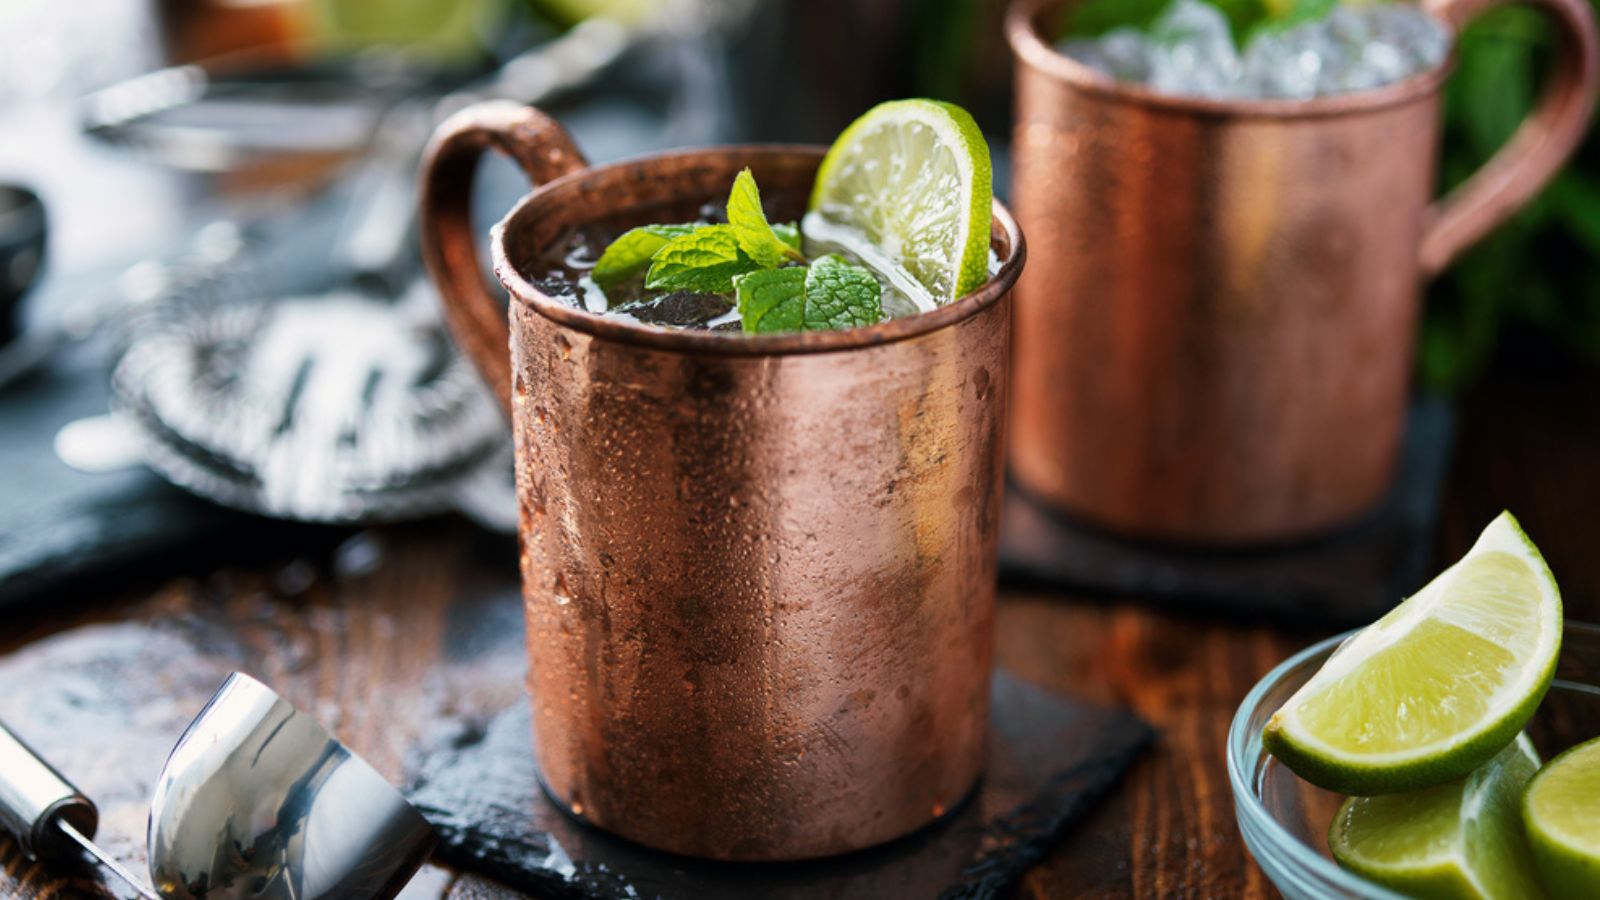 Moscow mule cocktails